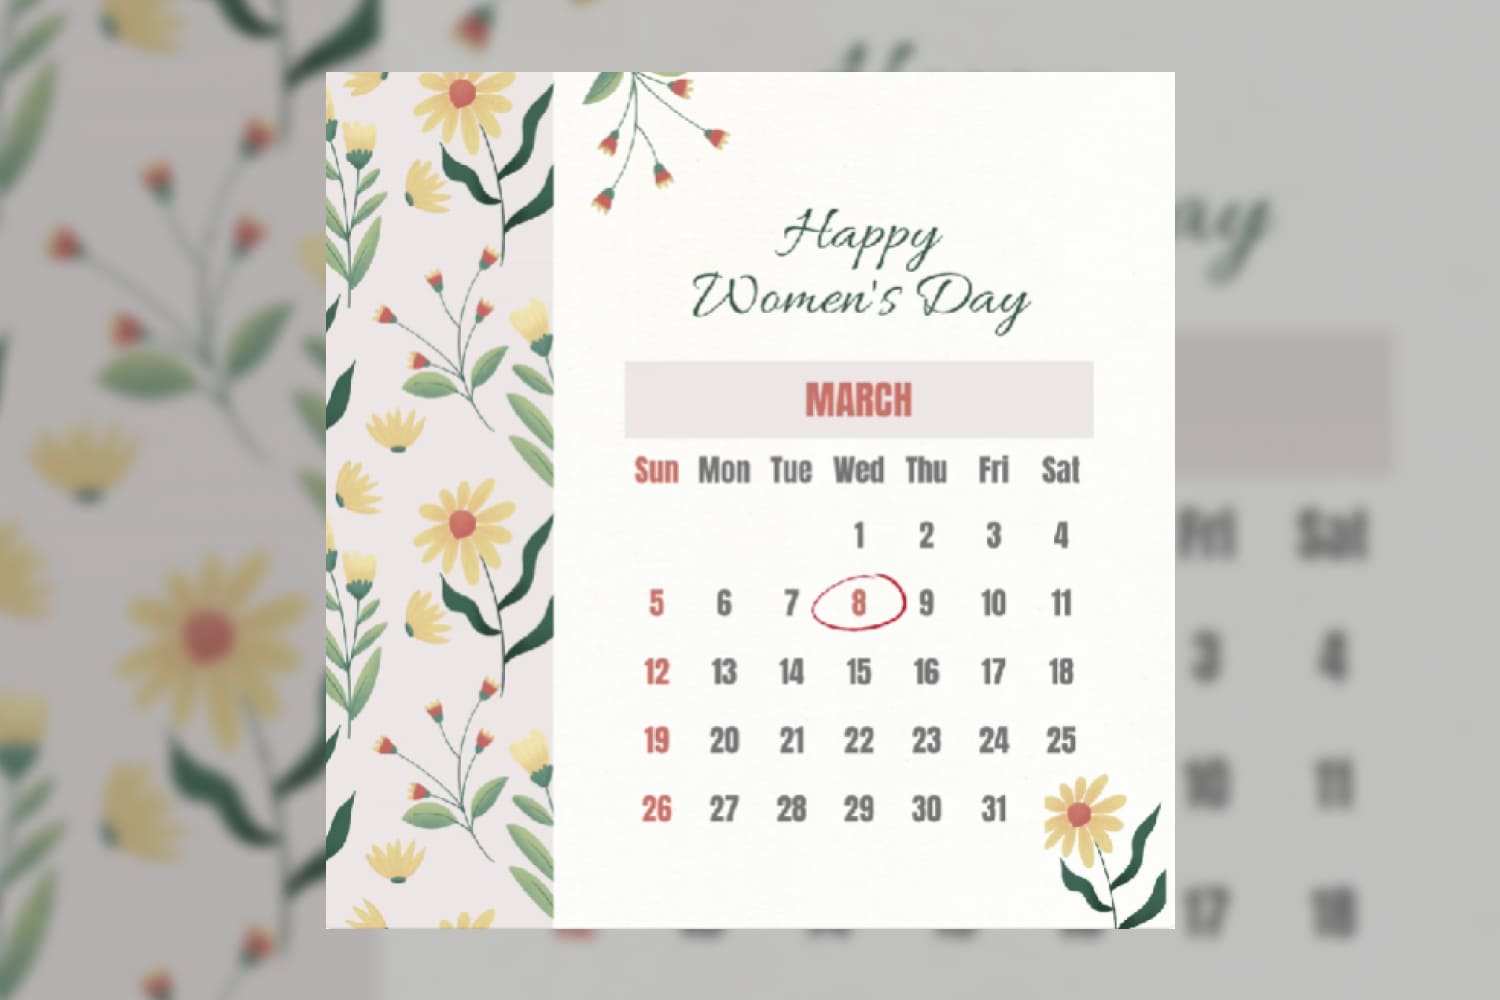 Floral calendar template features pastel colors and delicate illustrations, and inscription about celebrating Women's Day.